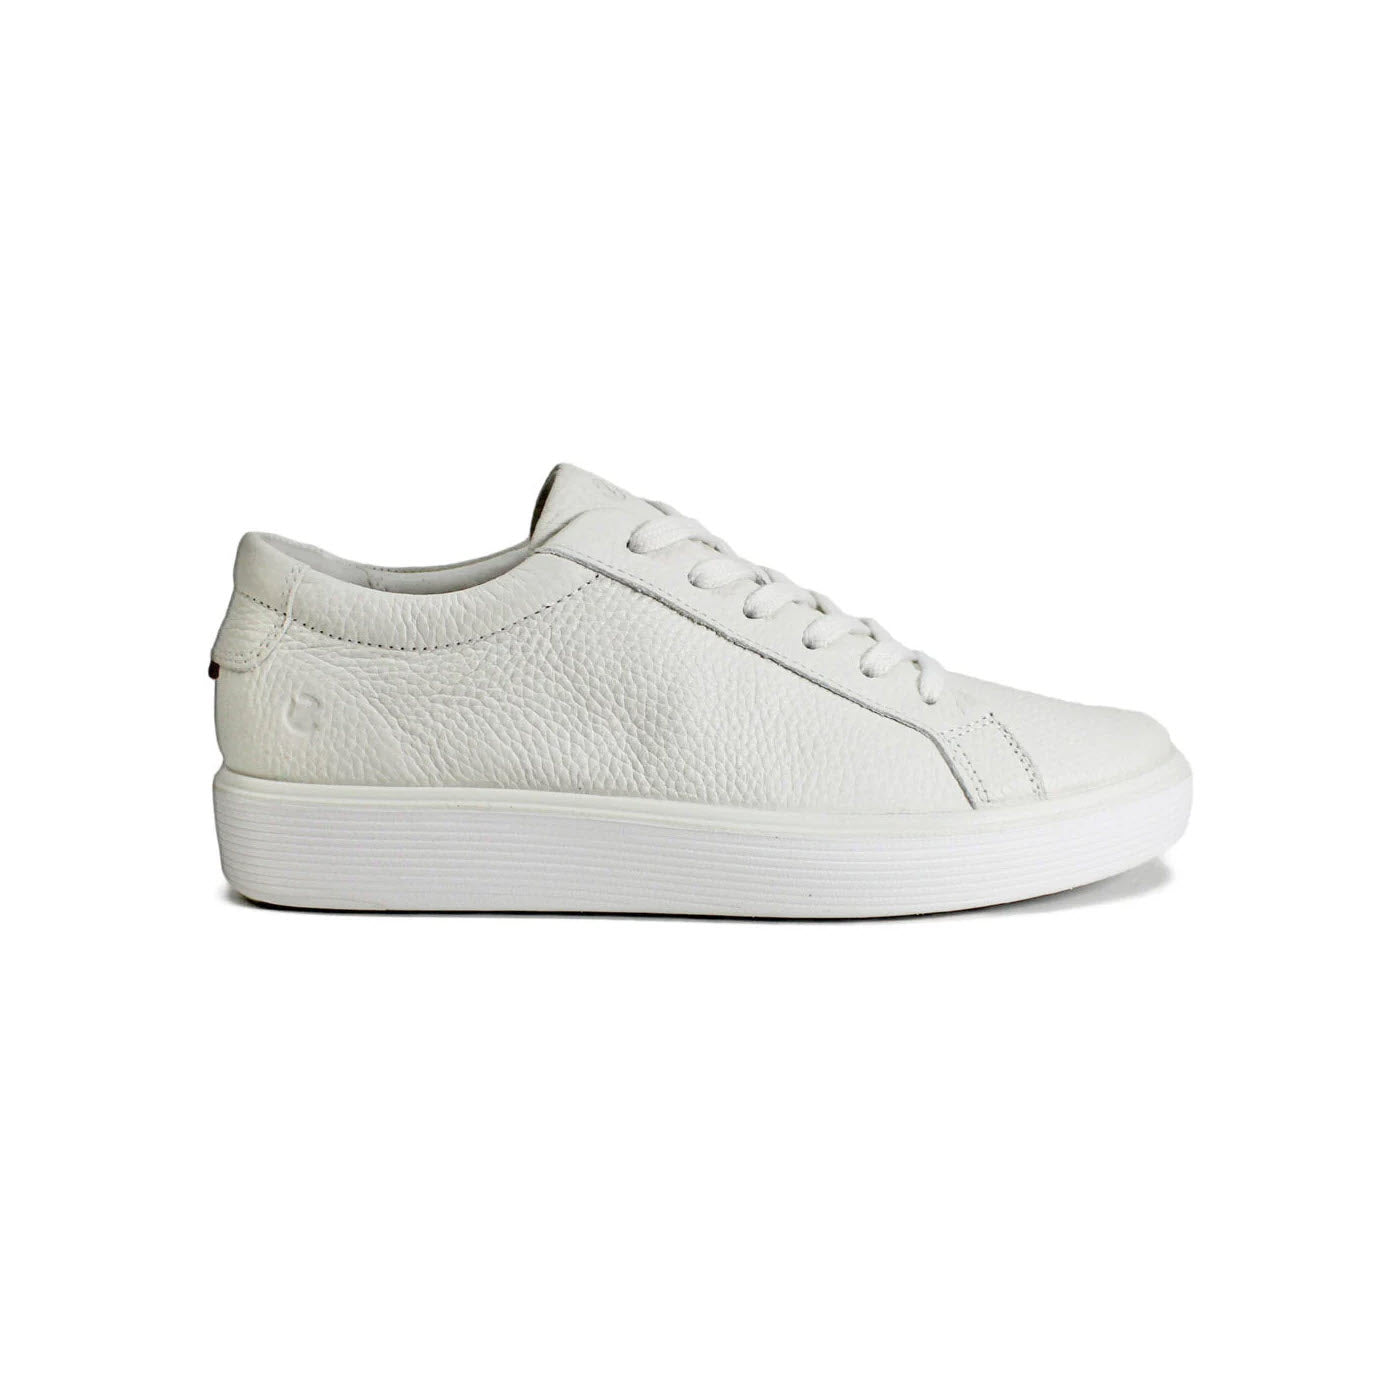 Ecco Soft 60 White low-top sneaker with a textured upper and thick sole, featuring a padded footbed, displayed against a plain white background.